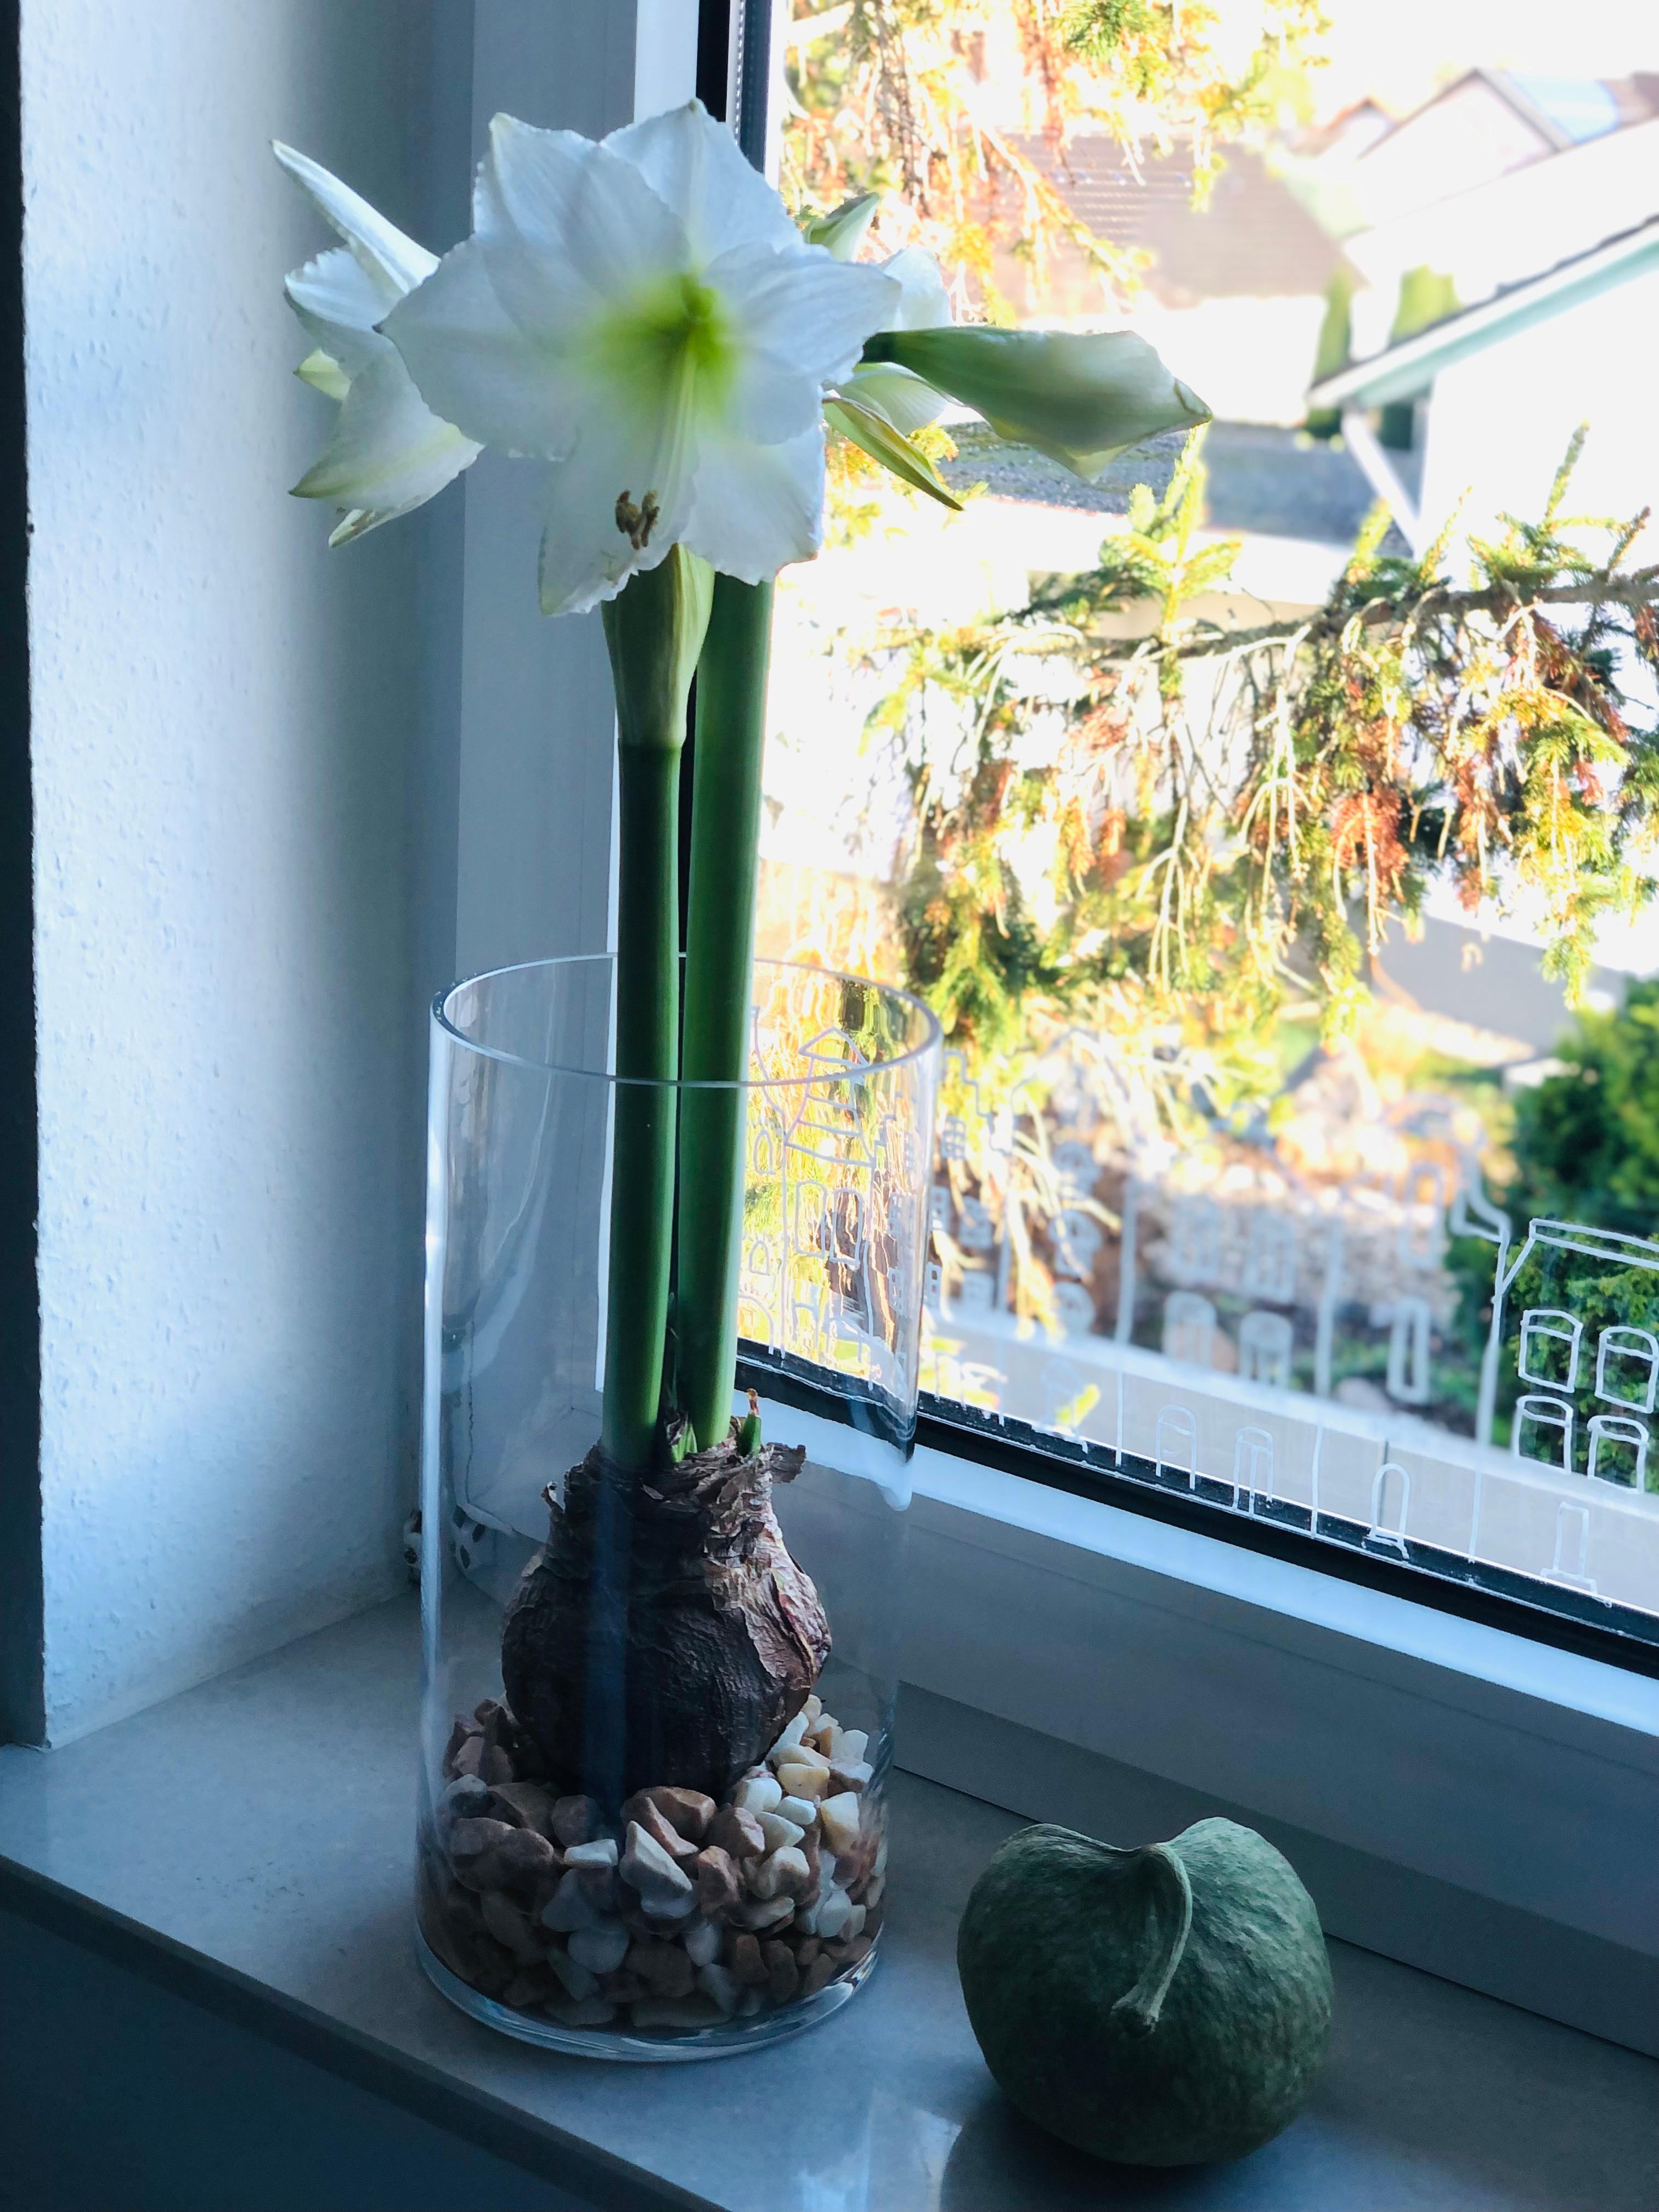 In bloom. #amaryllis #simplicity 